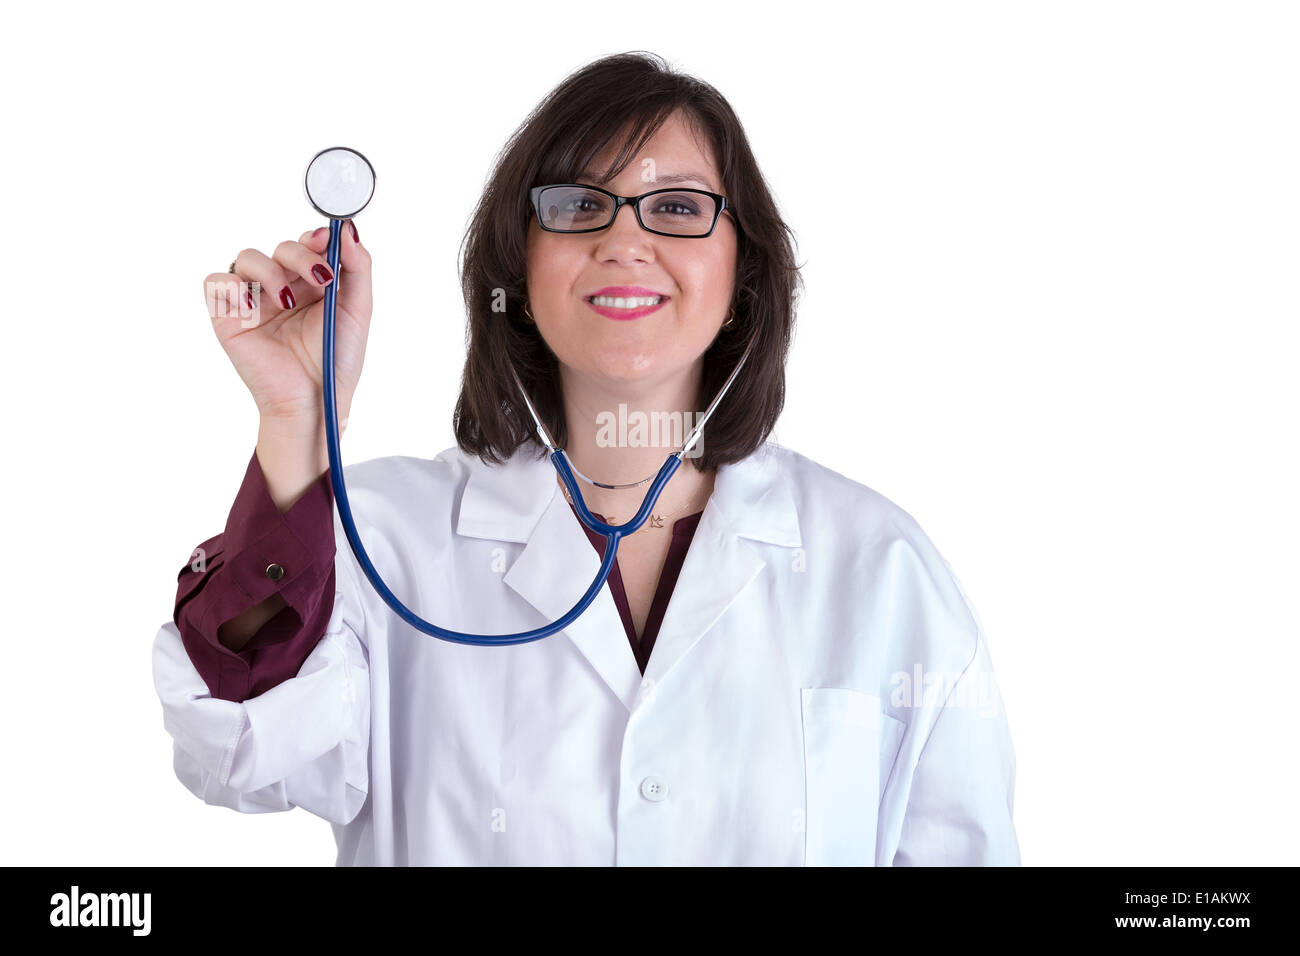 Sympathetic healthcare Intern looking at you genuinely and friendly while holding her stethoscope high Stock Photo